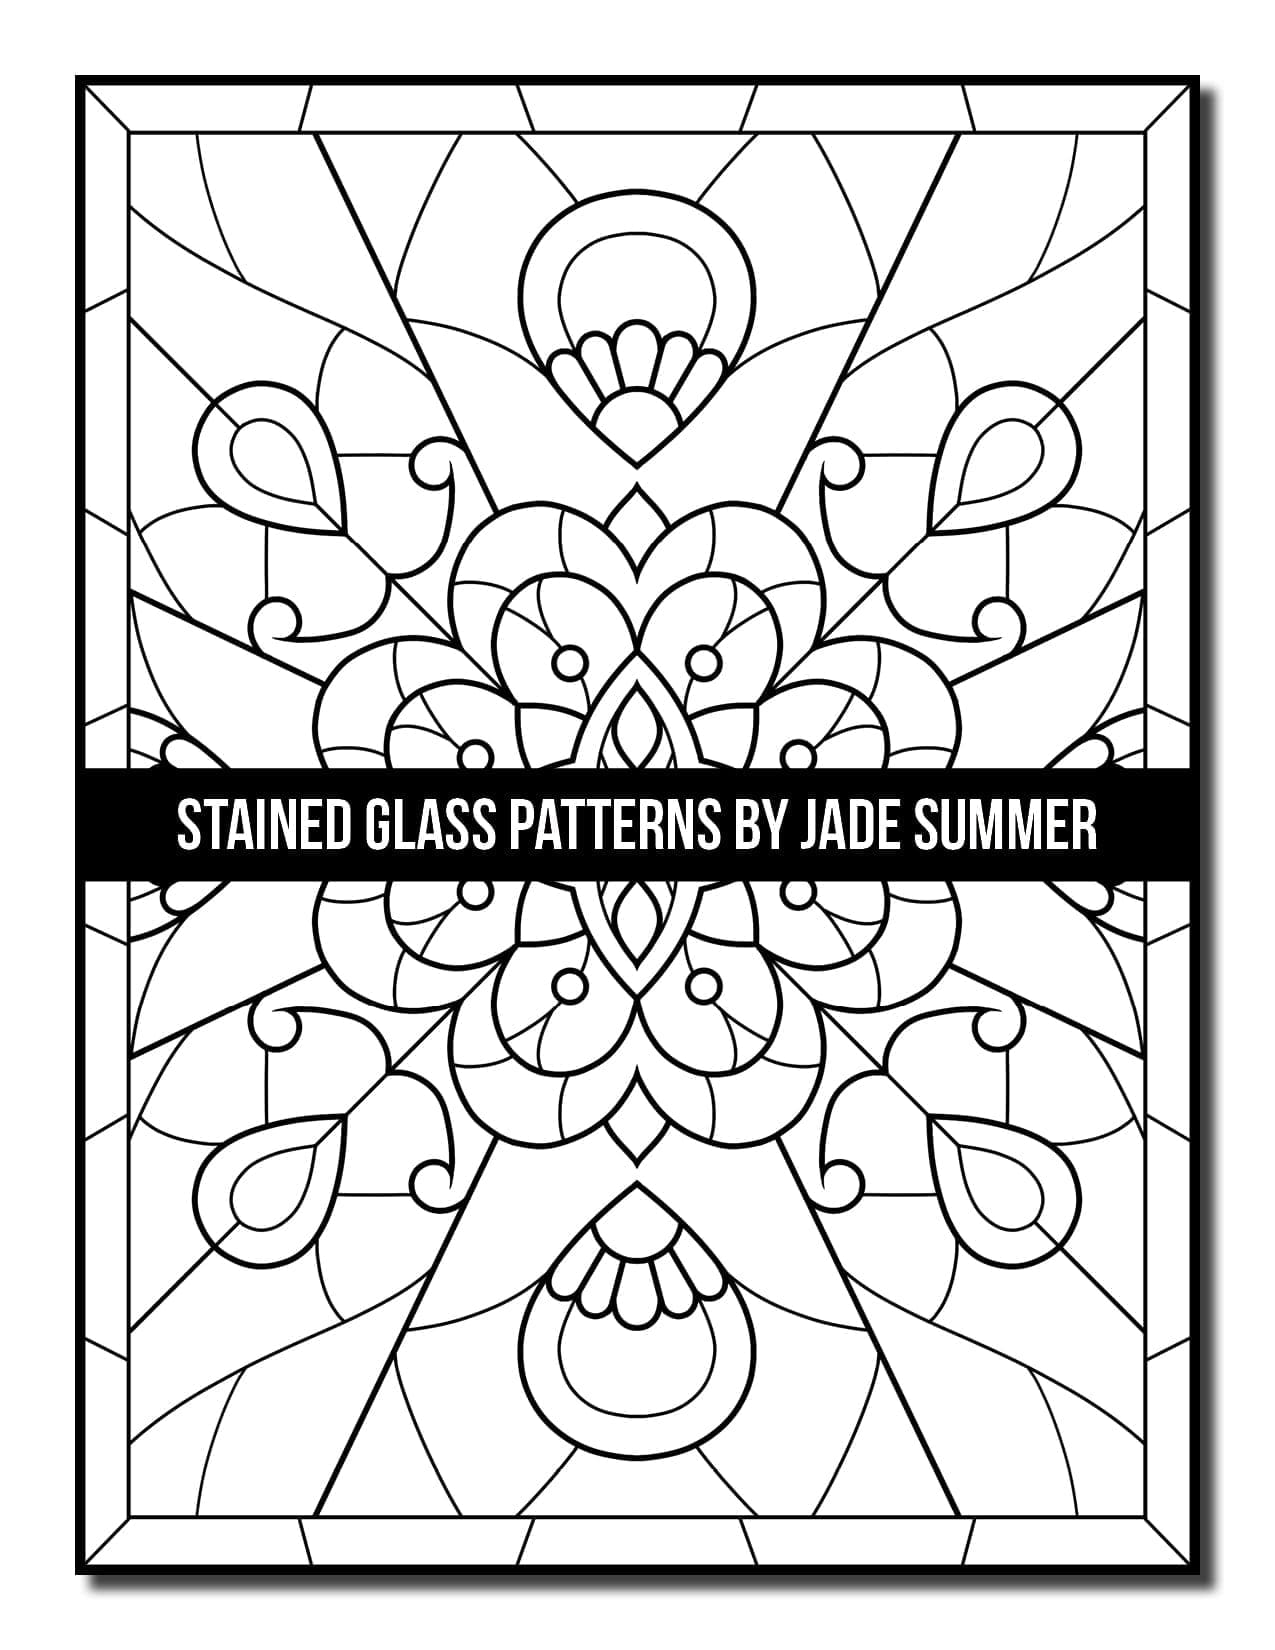 Stained Glass Patterns Coloring Book Jade Summer